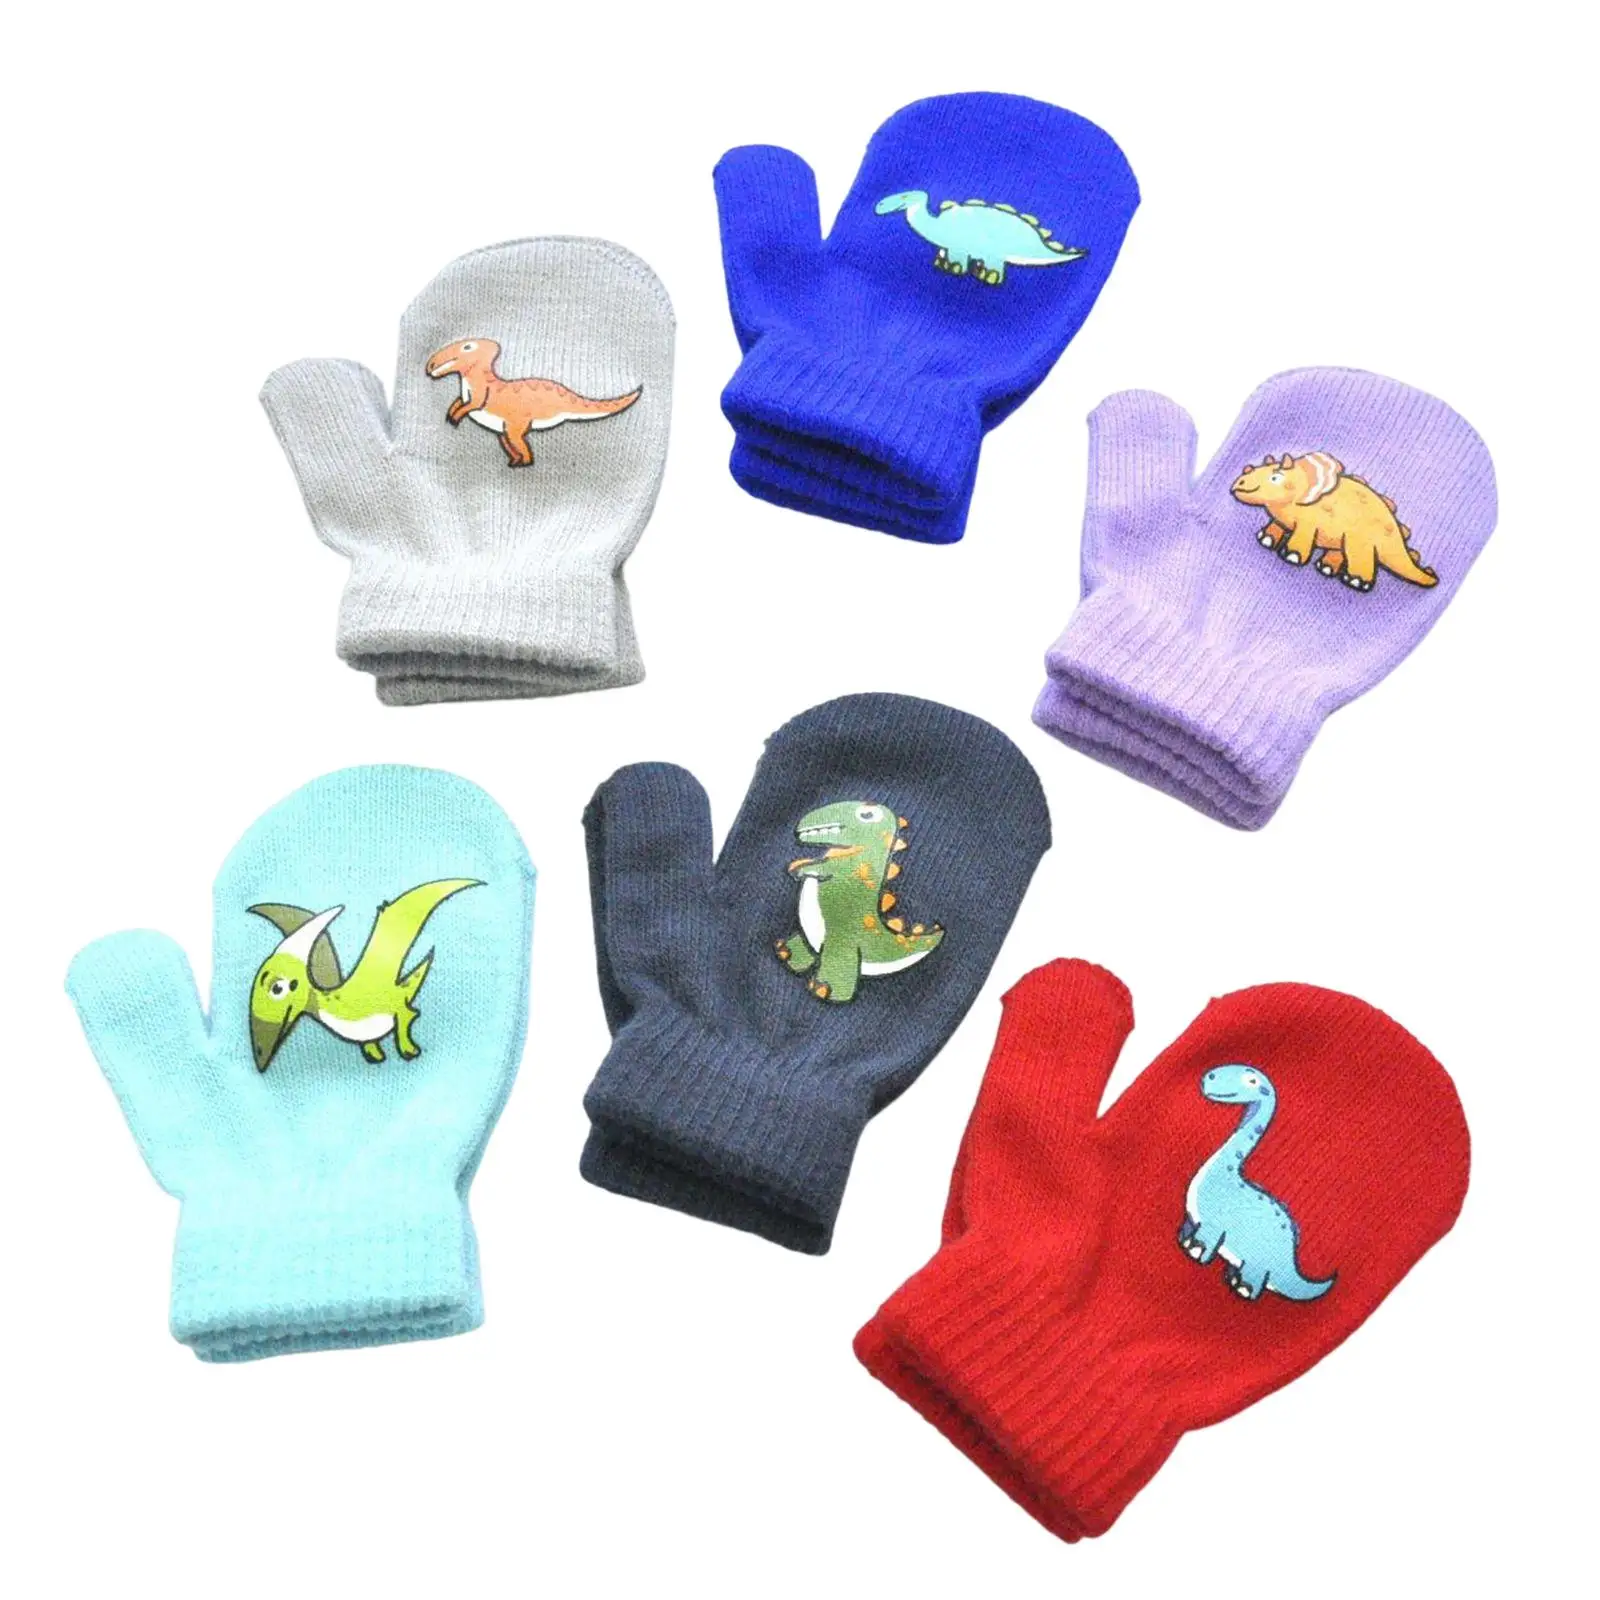 6 Pairs Kids Winter Gloves Stretch Knitted for Boys Girls Reusable Assorted color Appearance Comfortable to Wear Warm